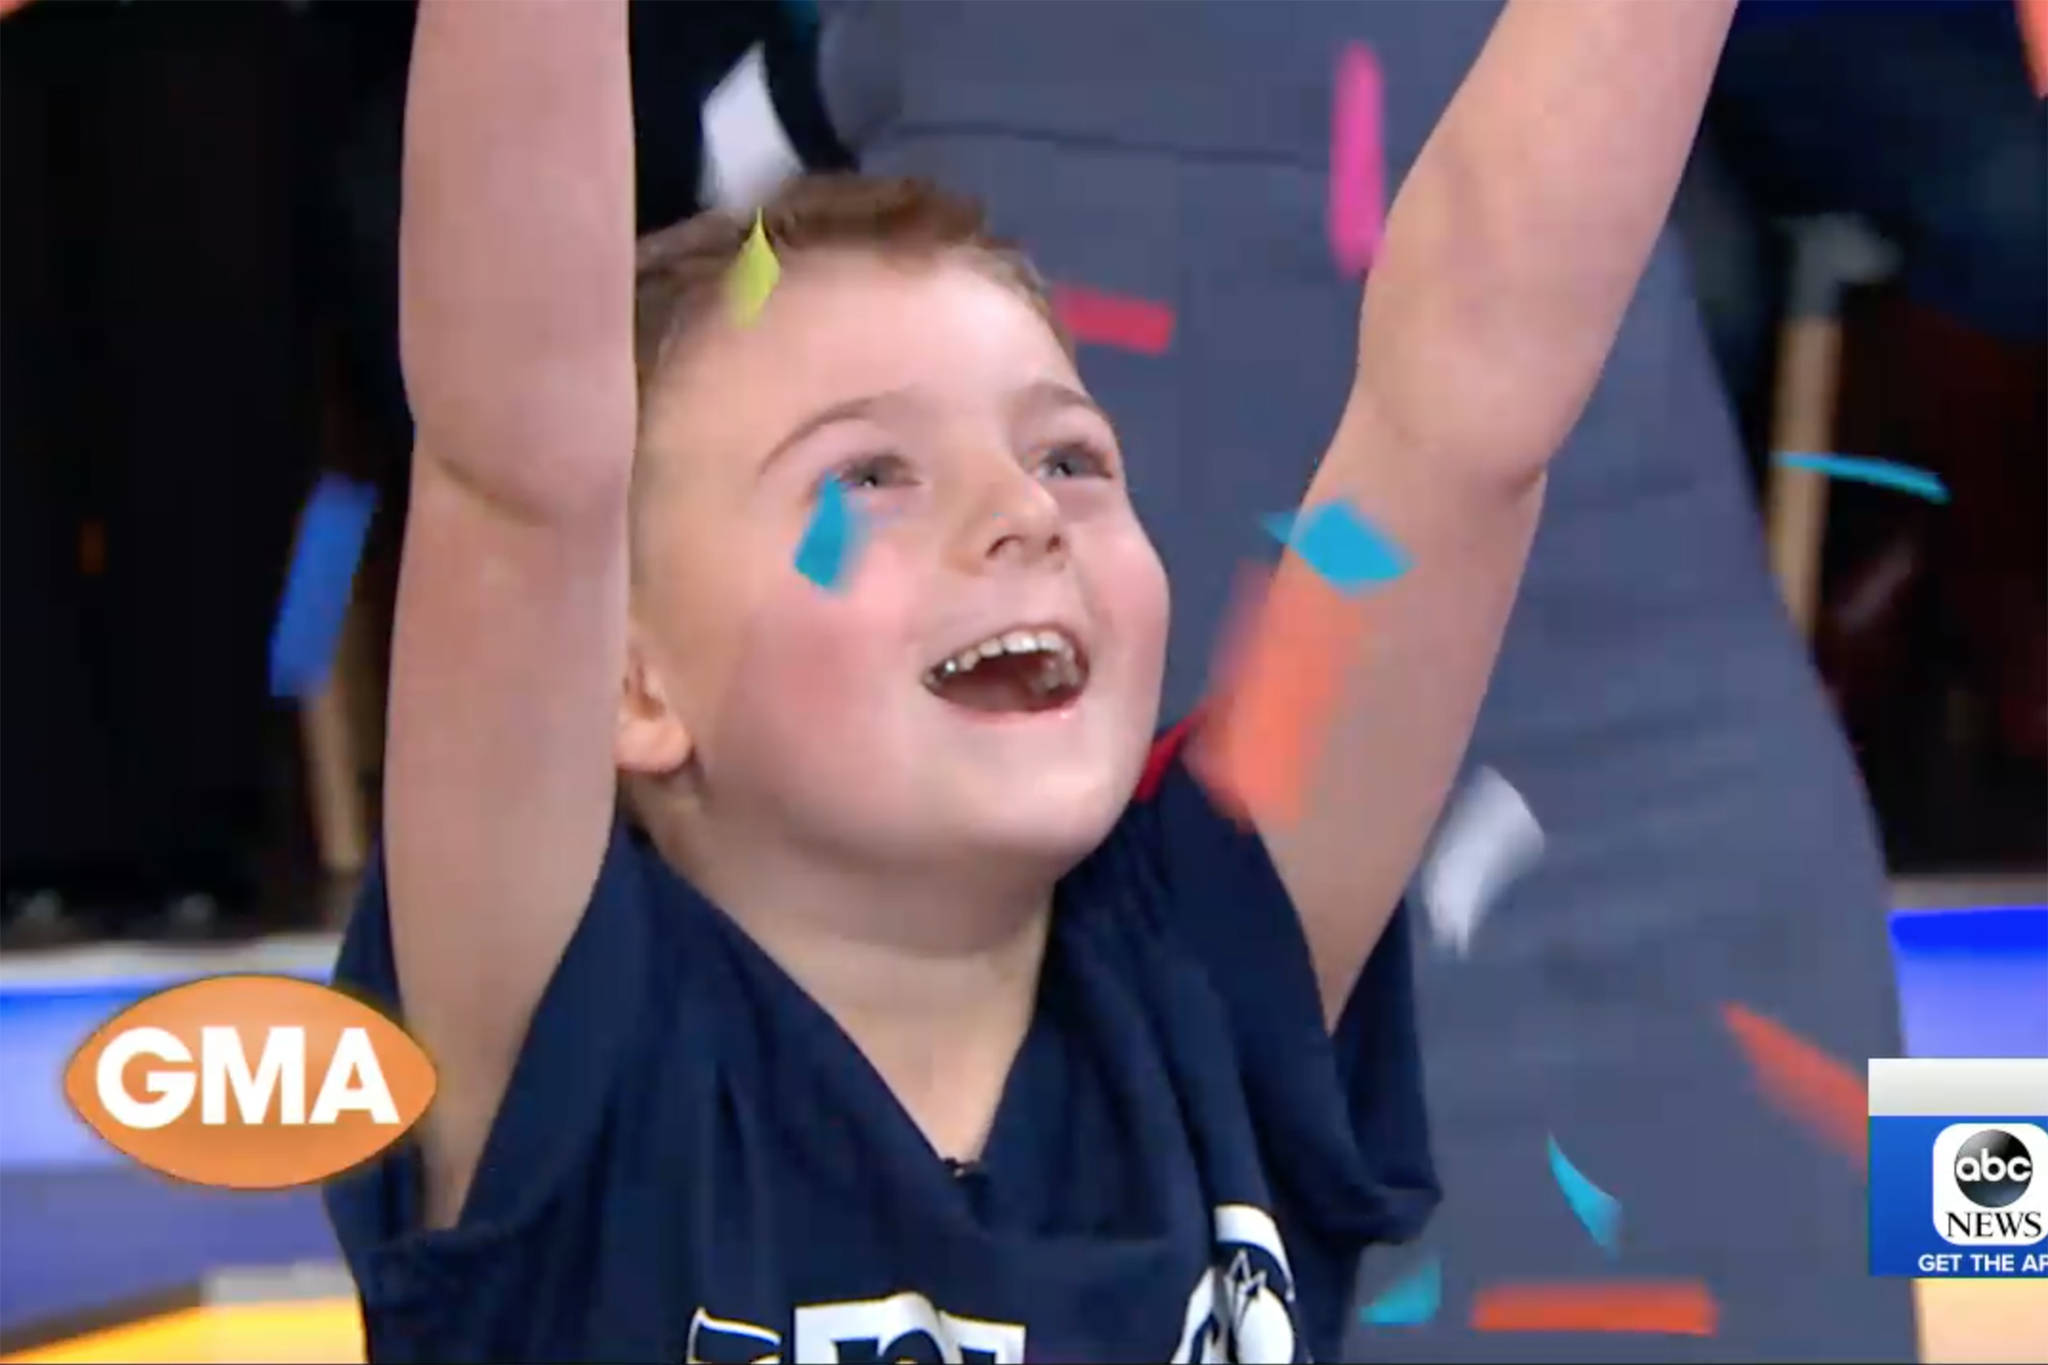 Camdyn Clancy, 8, celebrates winning the NFL PLAY 60 Super Kid contest during ABC’s “Good Morning America” on Tuesday. (Screenshot)